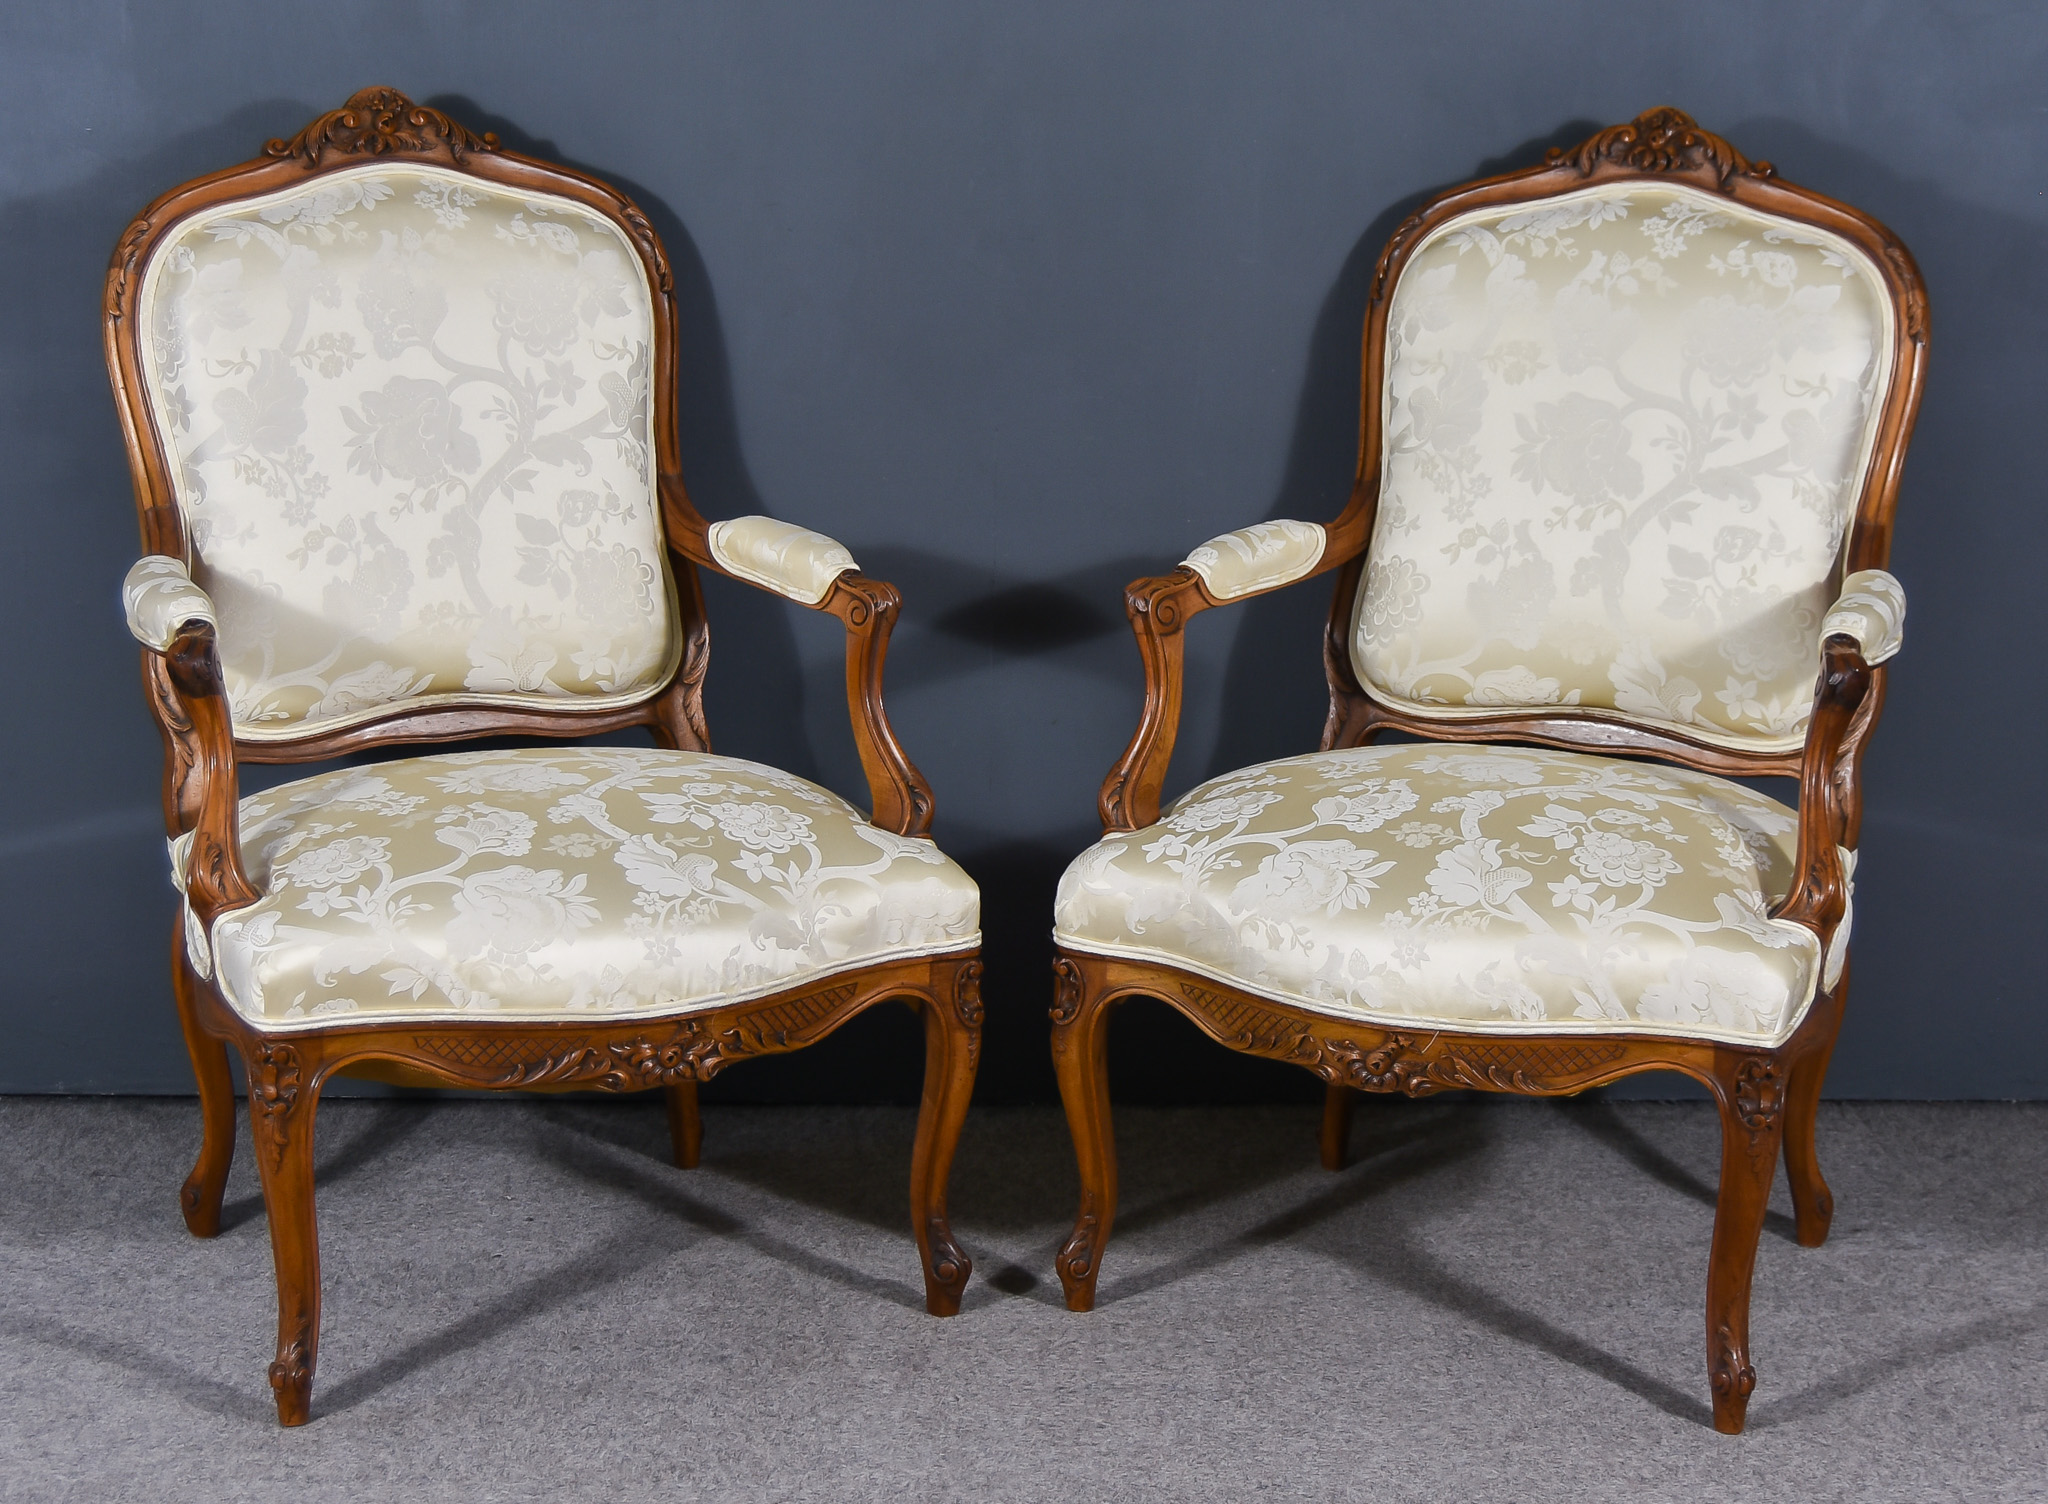 A Pair of 19th Century French Walnut Framed Open Fauteuils of Louis XV Design, with shaped and